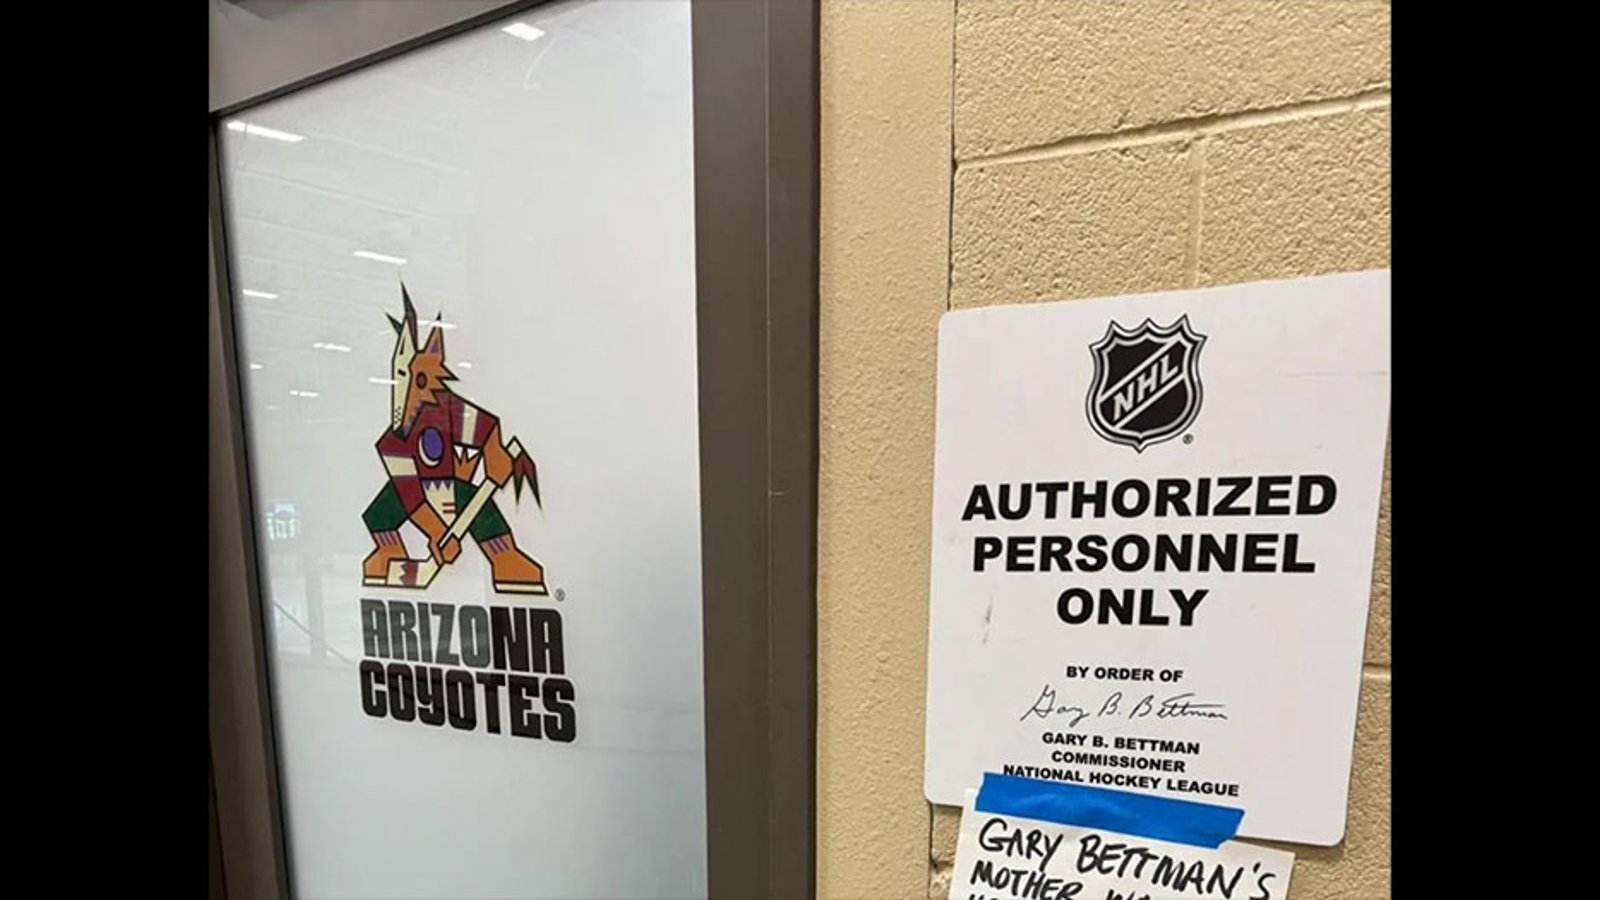 Coyotes players take a shot at Gary Bettman's Mom ahead of team's final game in Arizona